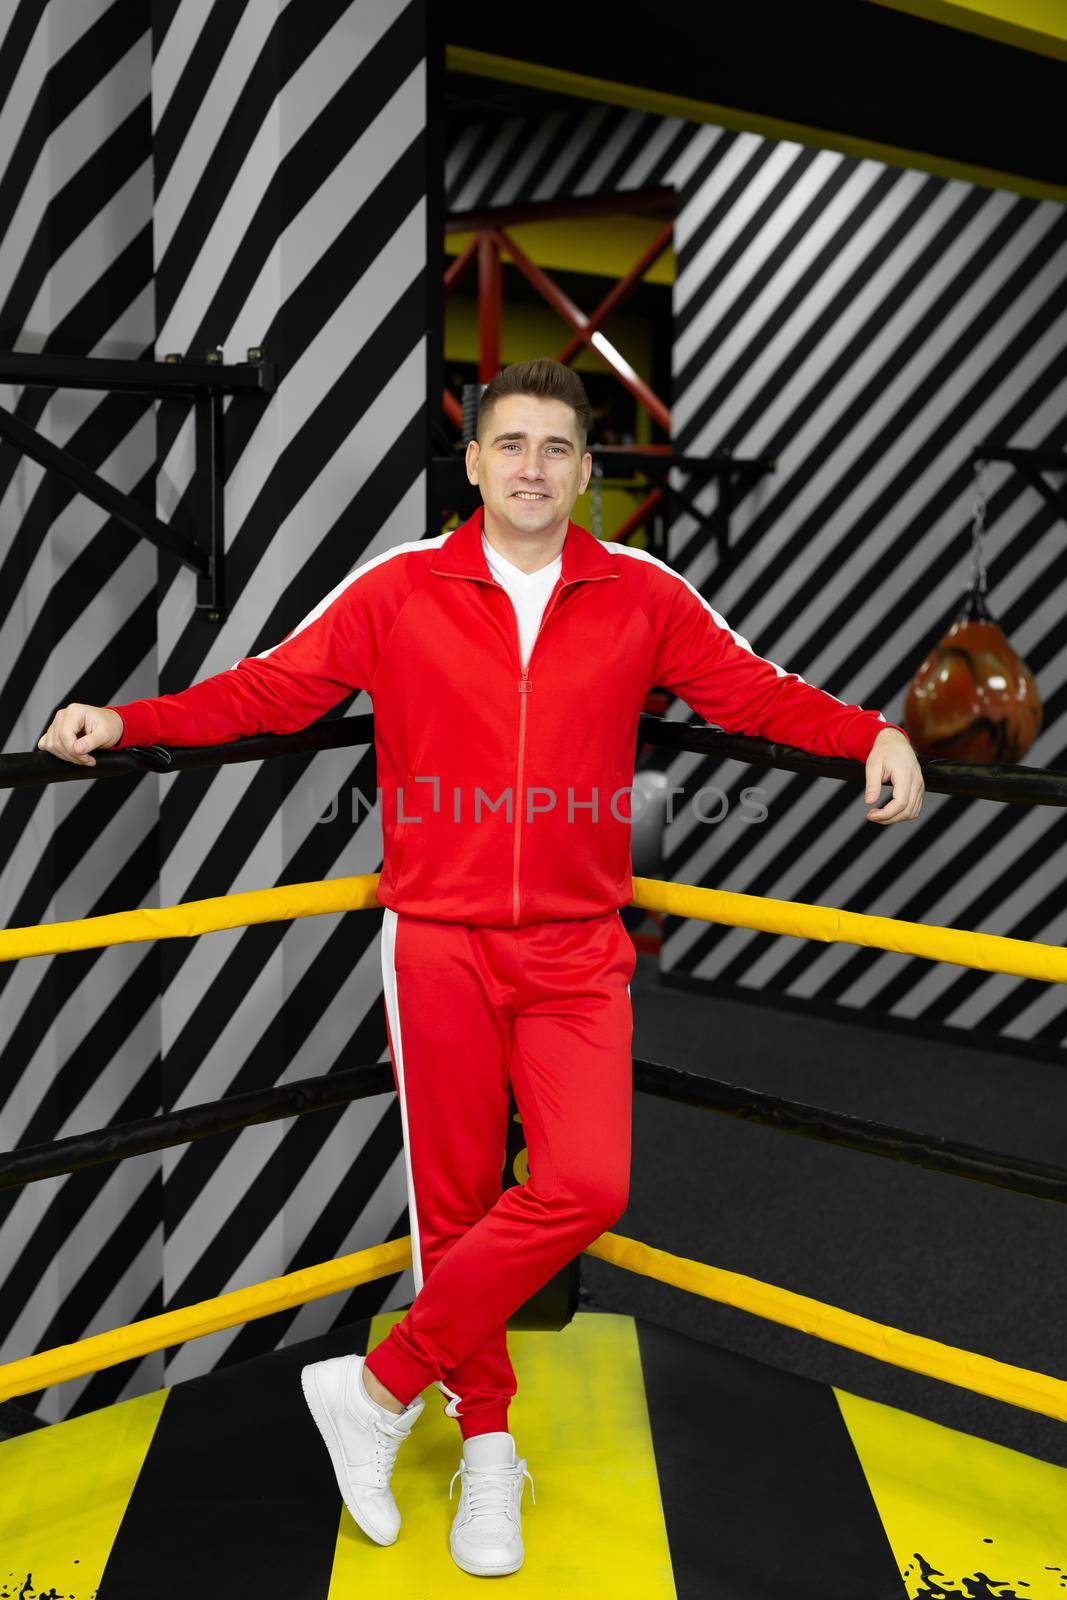 Man in a red tracksuit poses and has fun in the boxing ring